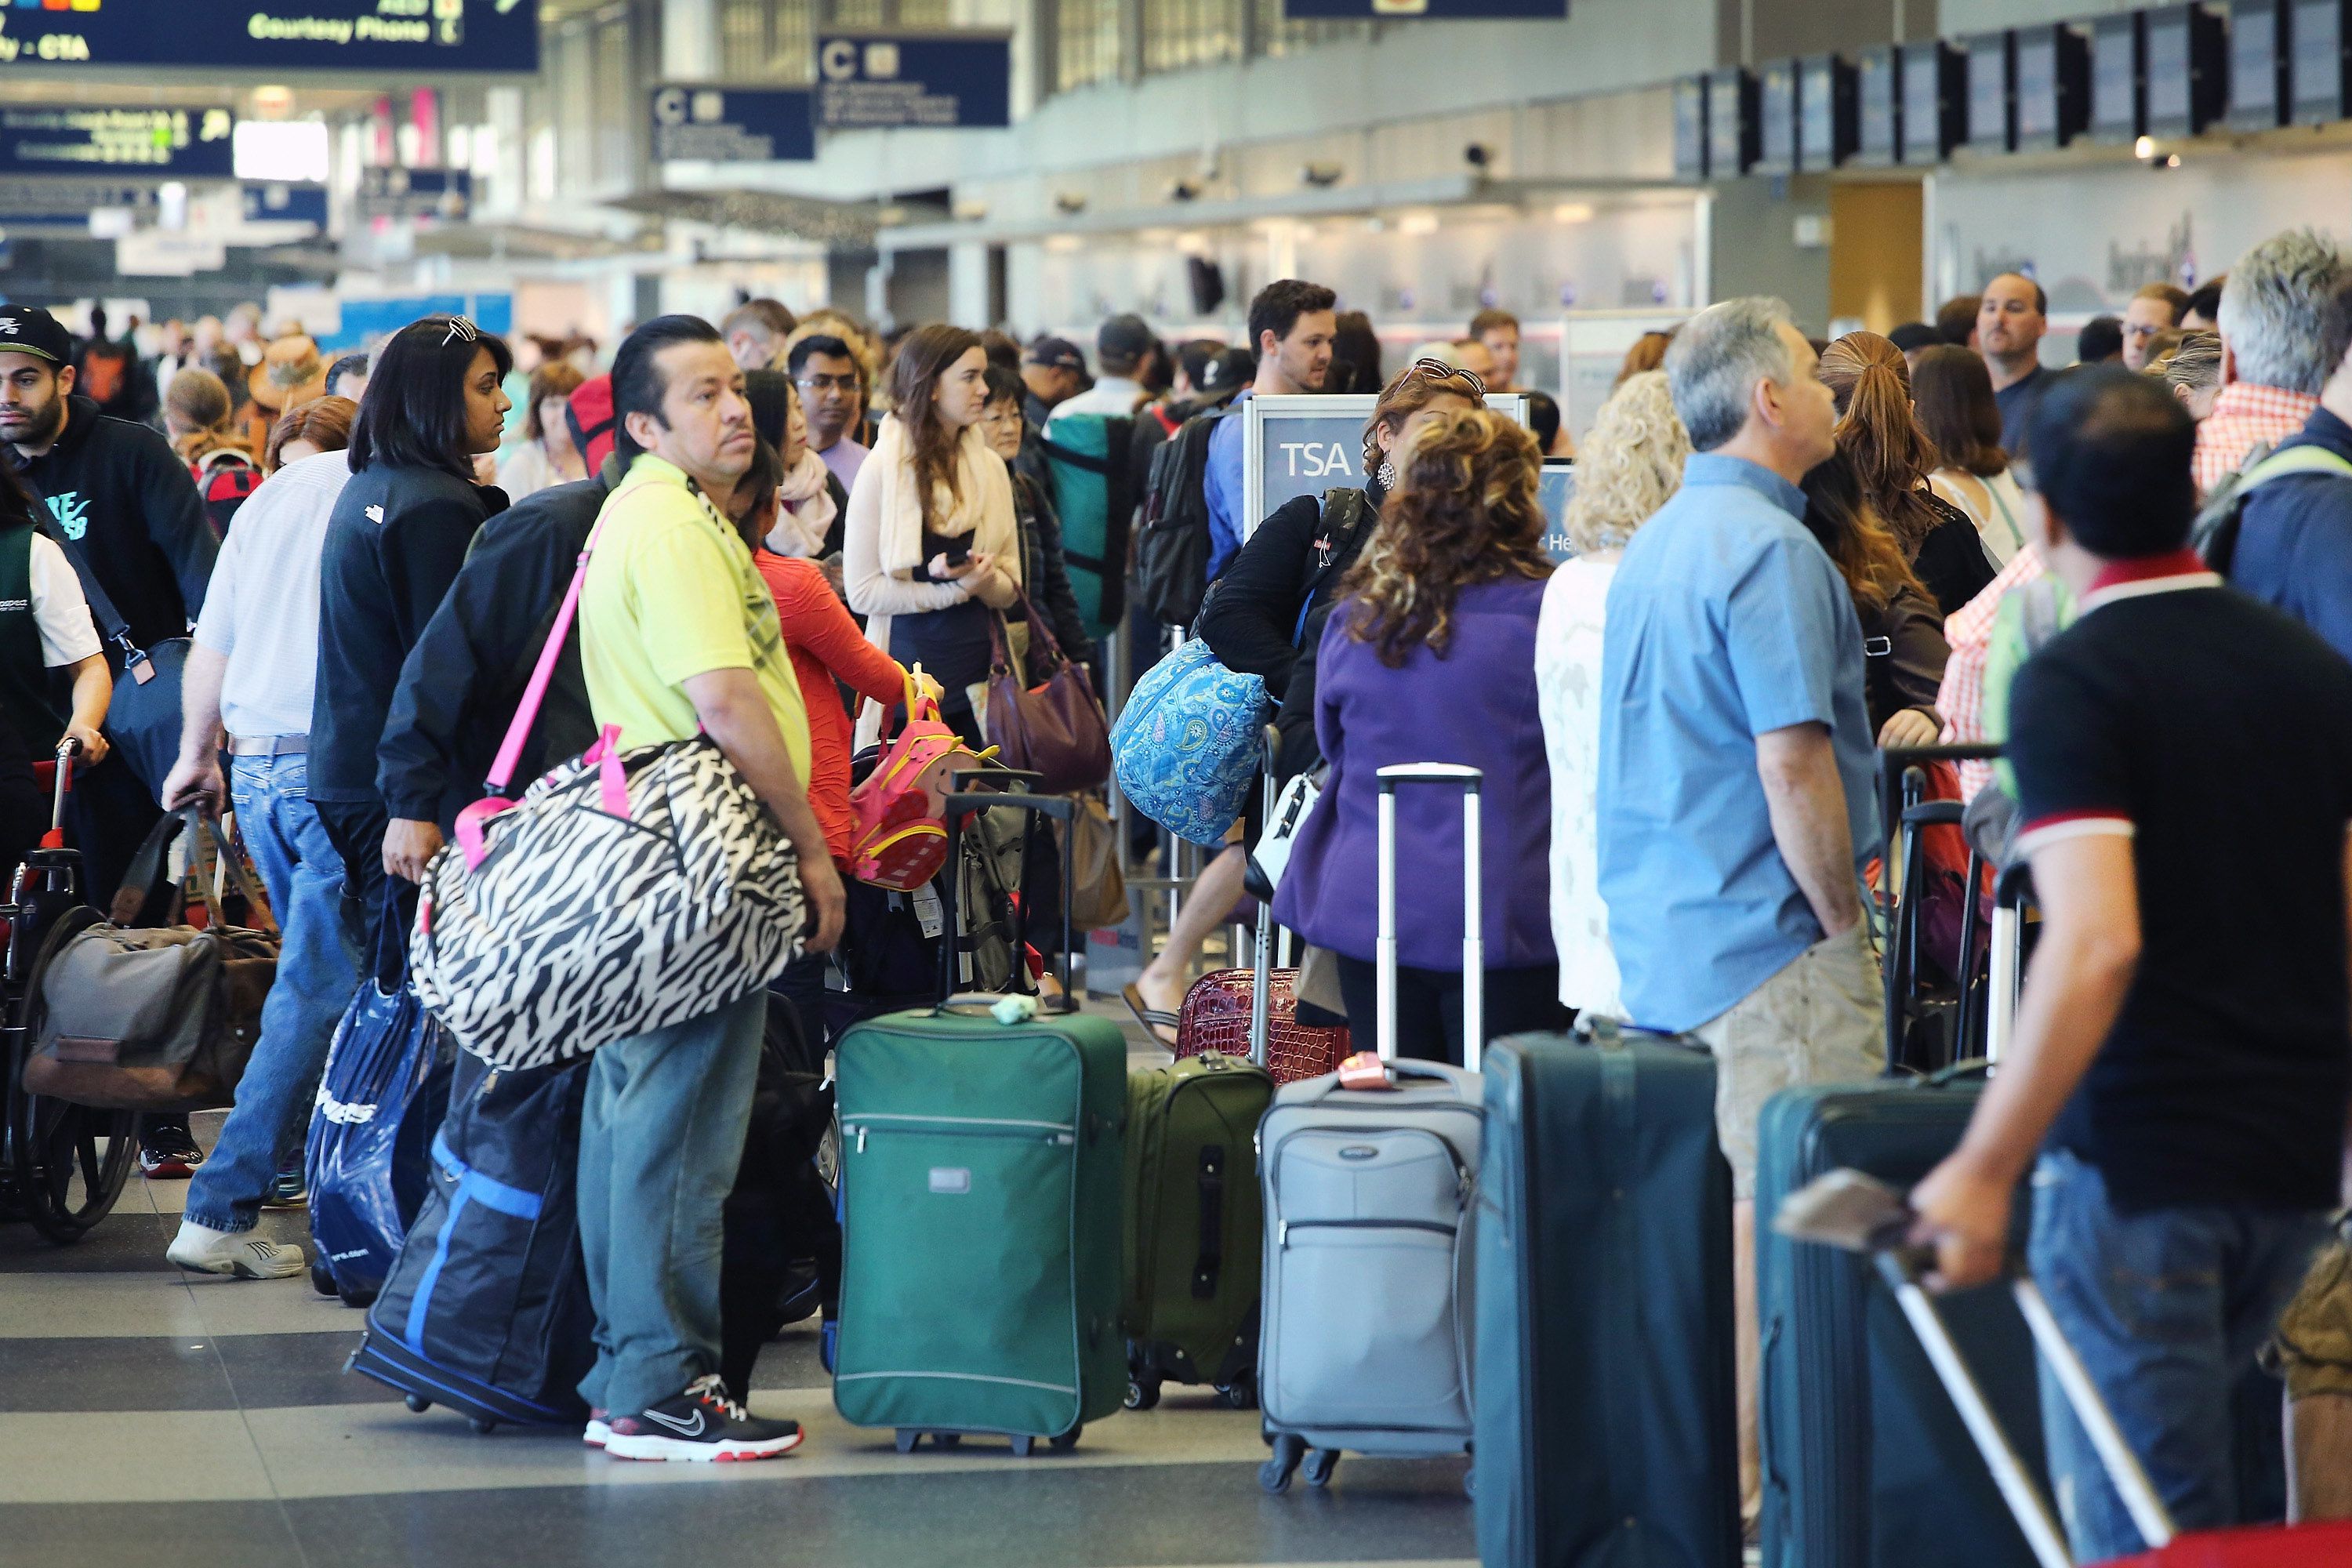 Passengers wait in line at a security checkpoint at O'Hare Airport in Chicago. (Scott Olson&mdash;Getty Images)